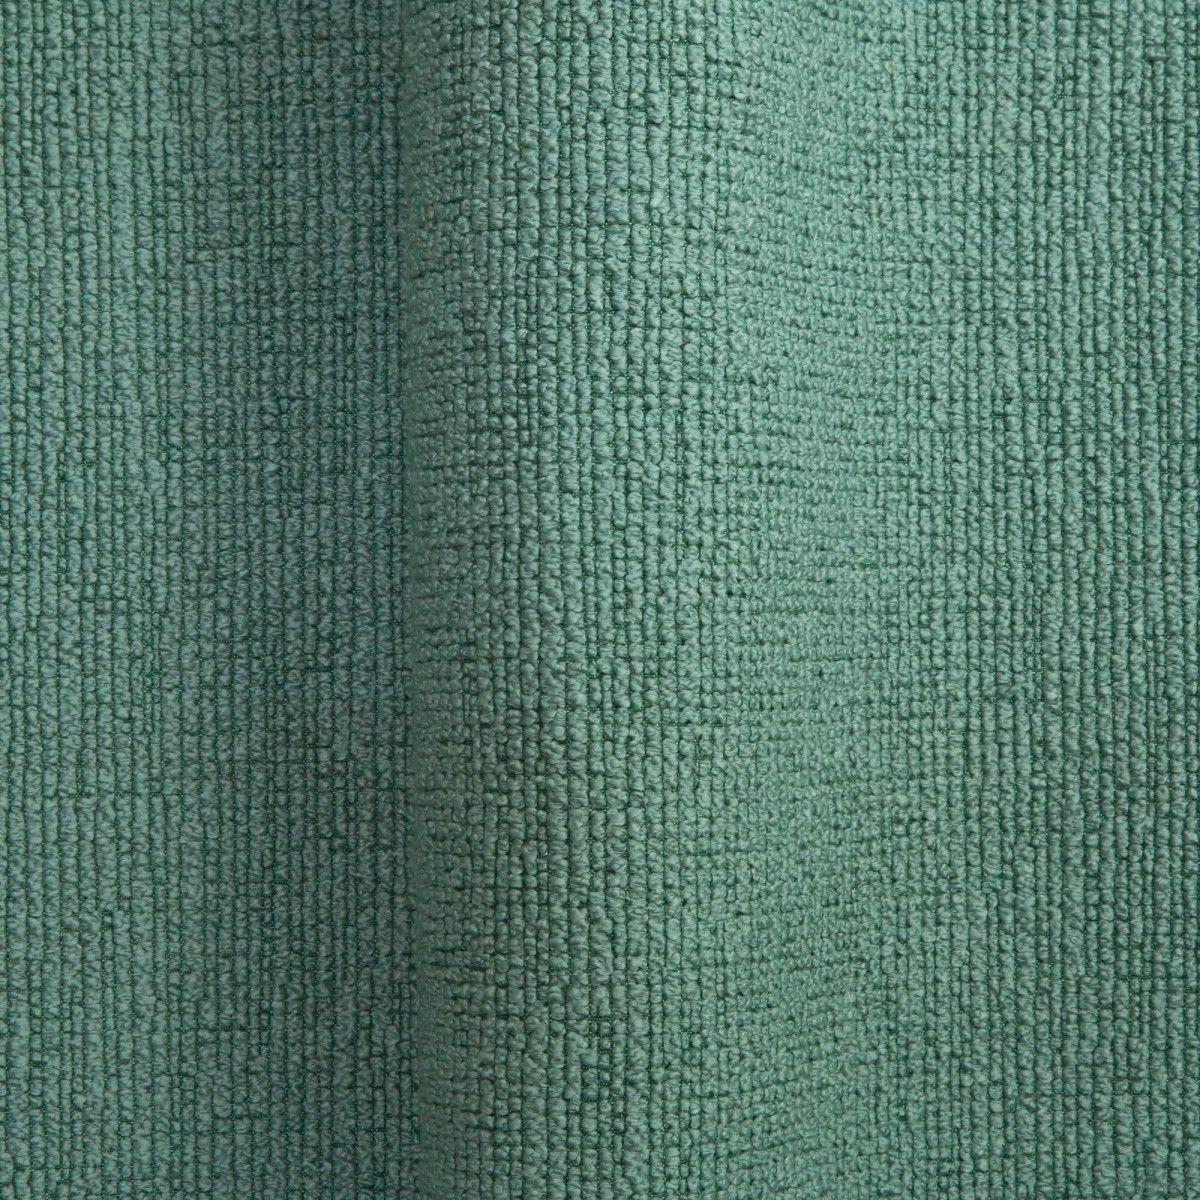 Popus Editions Giovanna 3 Seater Sofa in Mint Megeve Fabric with a Knit Effect

Giovanna is a sofa with a strong profile. A sober, plush line, with this famous detail that changes everything, so as not to forget its strength of character and this